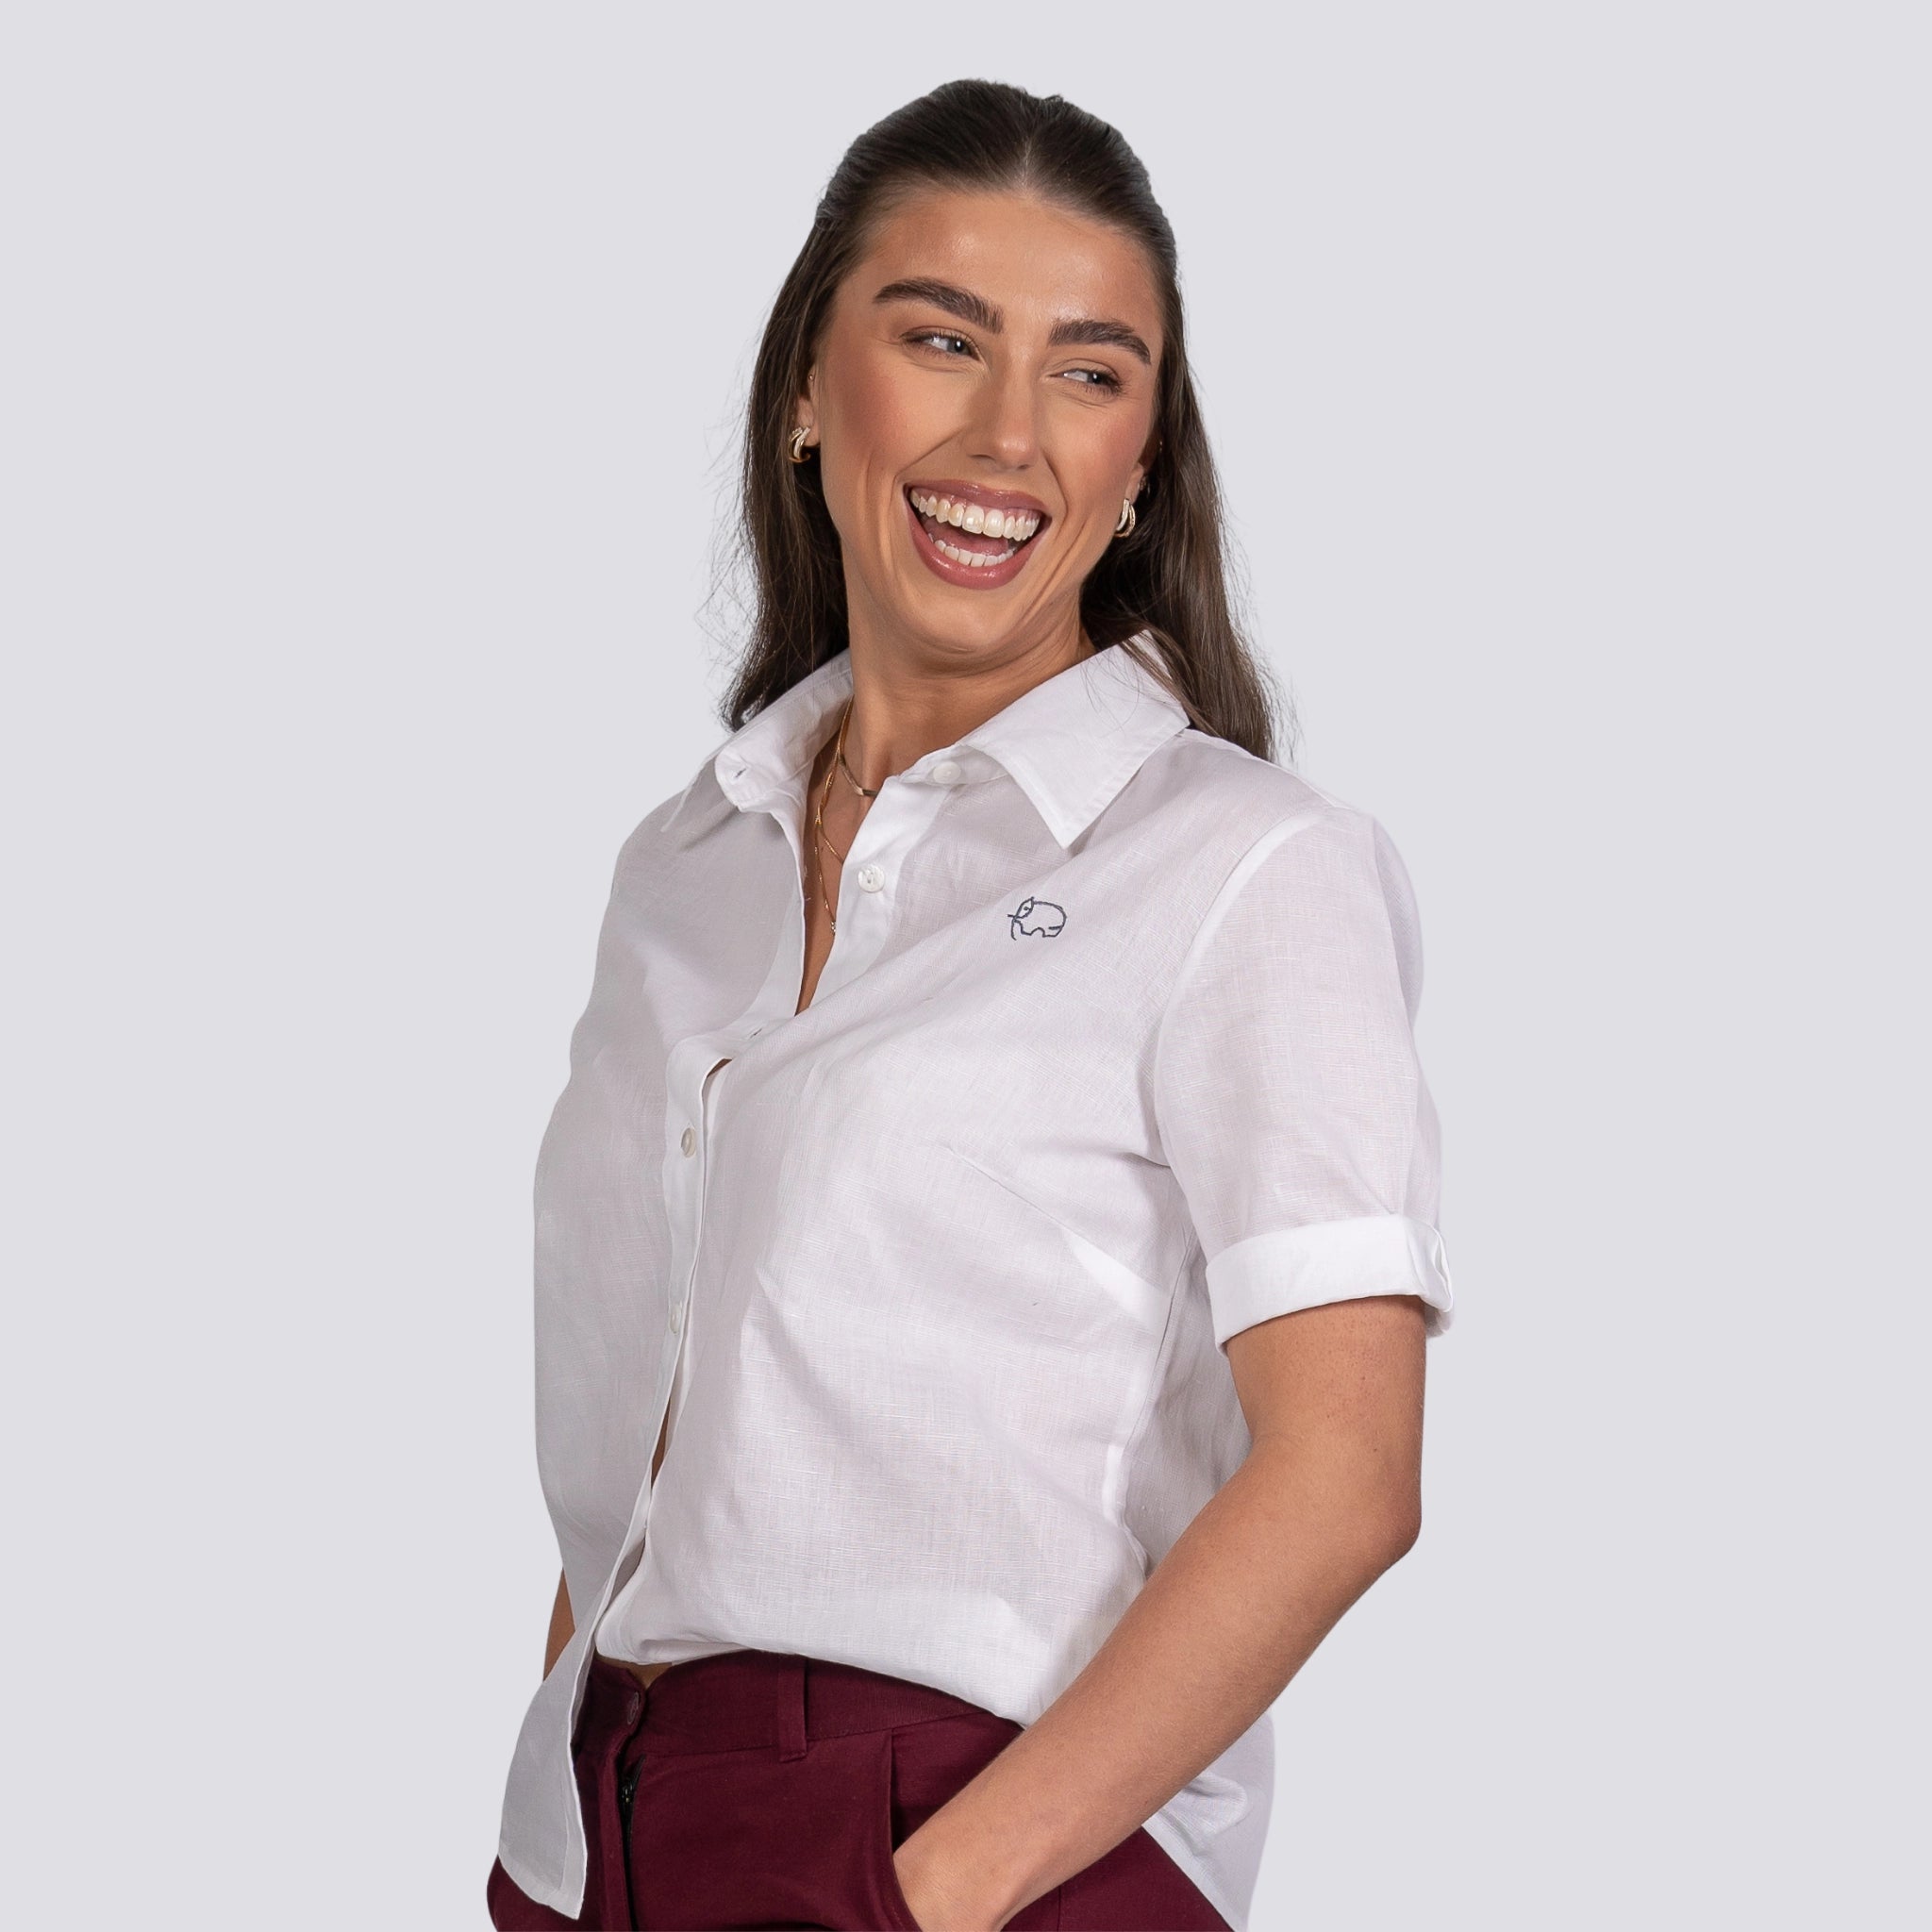 A woman with long dark hair, wearing a white Karee Pure Elegance White Linen Cotton Shirt and burgundy pants, smiling joyfully at something off-camera.